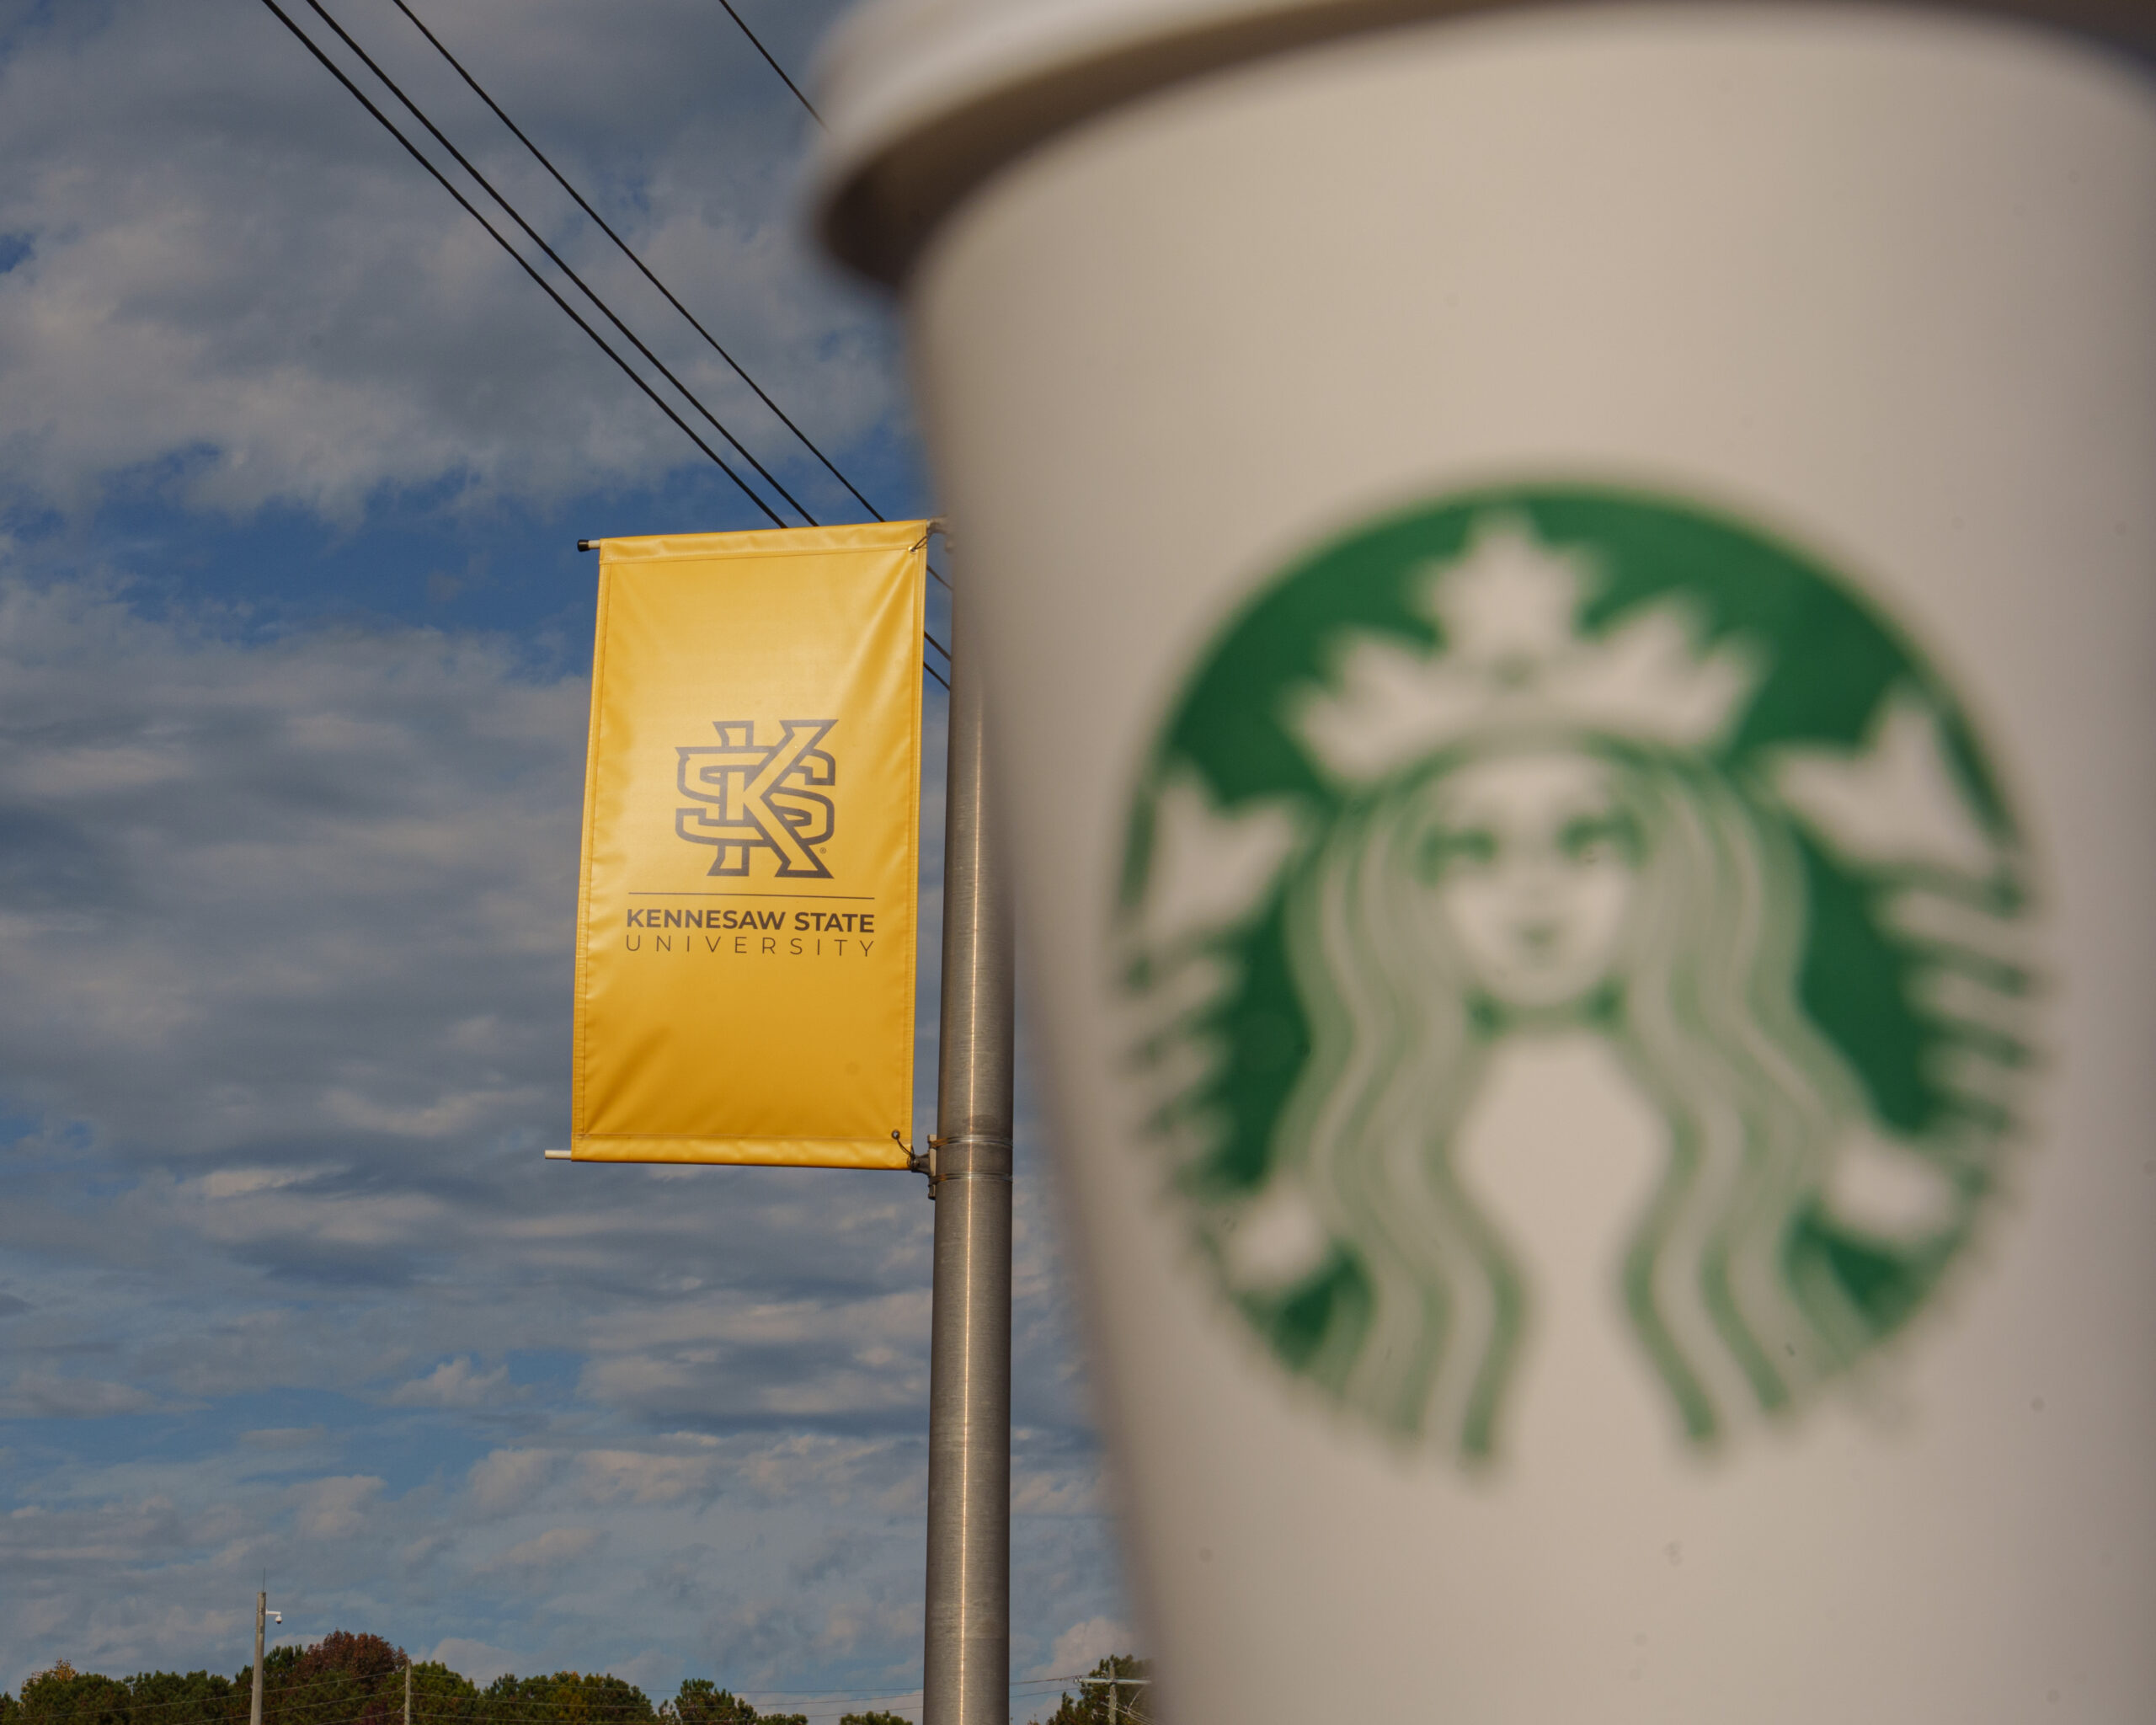 Starbucks cup posed in front of KSU sign.